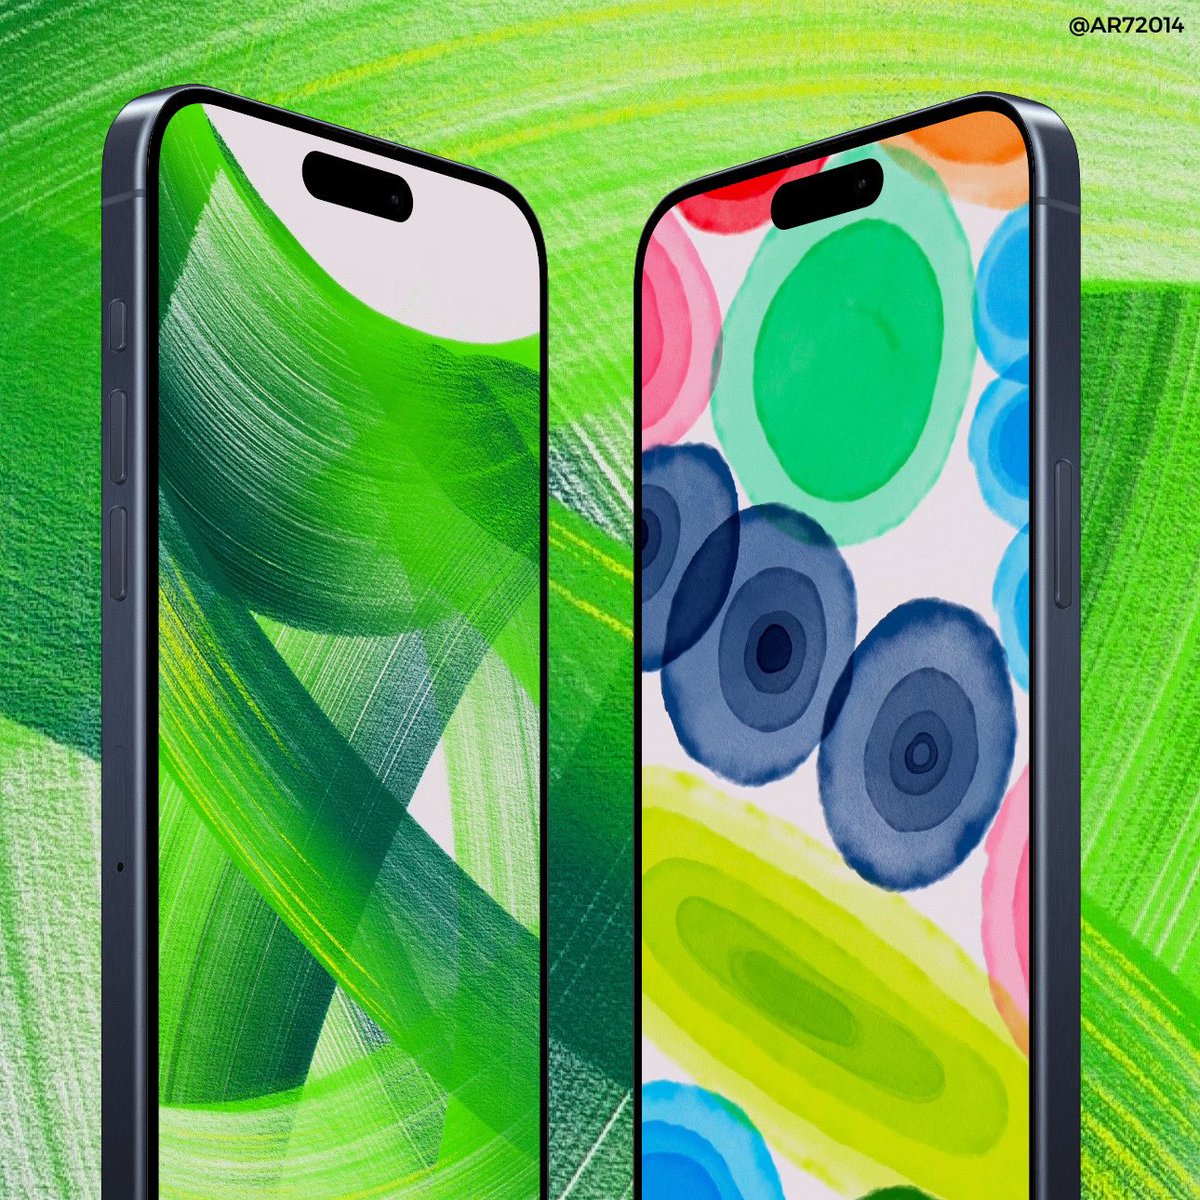 #AppleEvent #wallpapers UPDATE two new versions added 👀 x.com/ar72014/status…